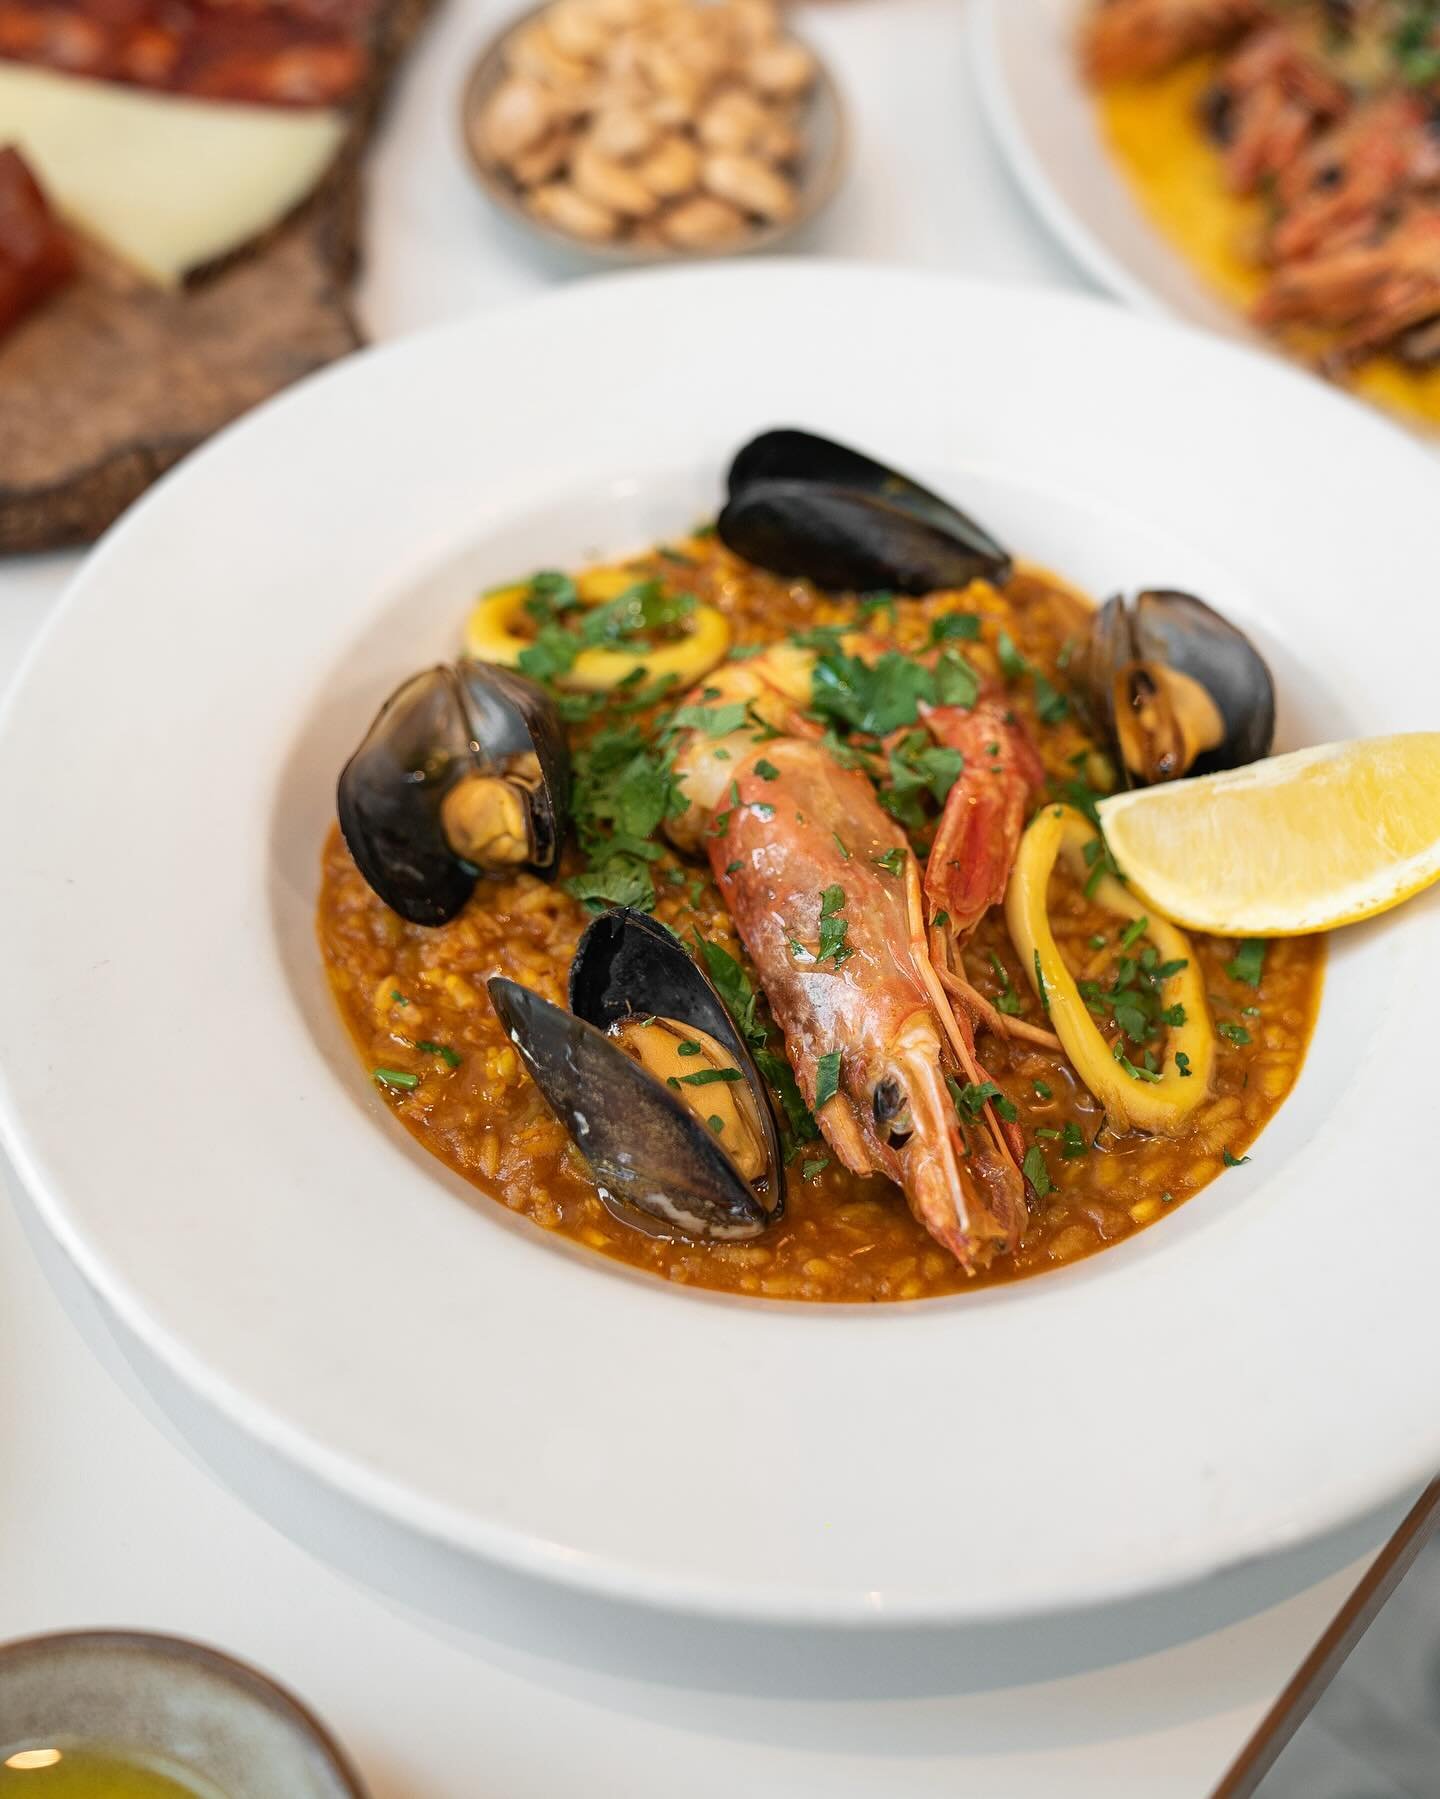 Close your eyes and experience the taste of the sea! 🌊🌅Our Seafood Rice with squid,clams, mussels and prawns will transport you to a Mediterranean paradise🦐🦑
.
.
.
.
#seafoodfeast #seafoods #seafoodrice #londonfood #tapasrestaurant #london #lagam